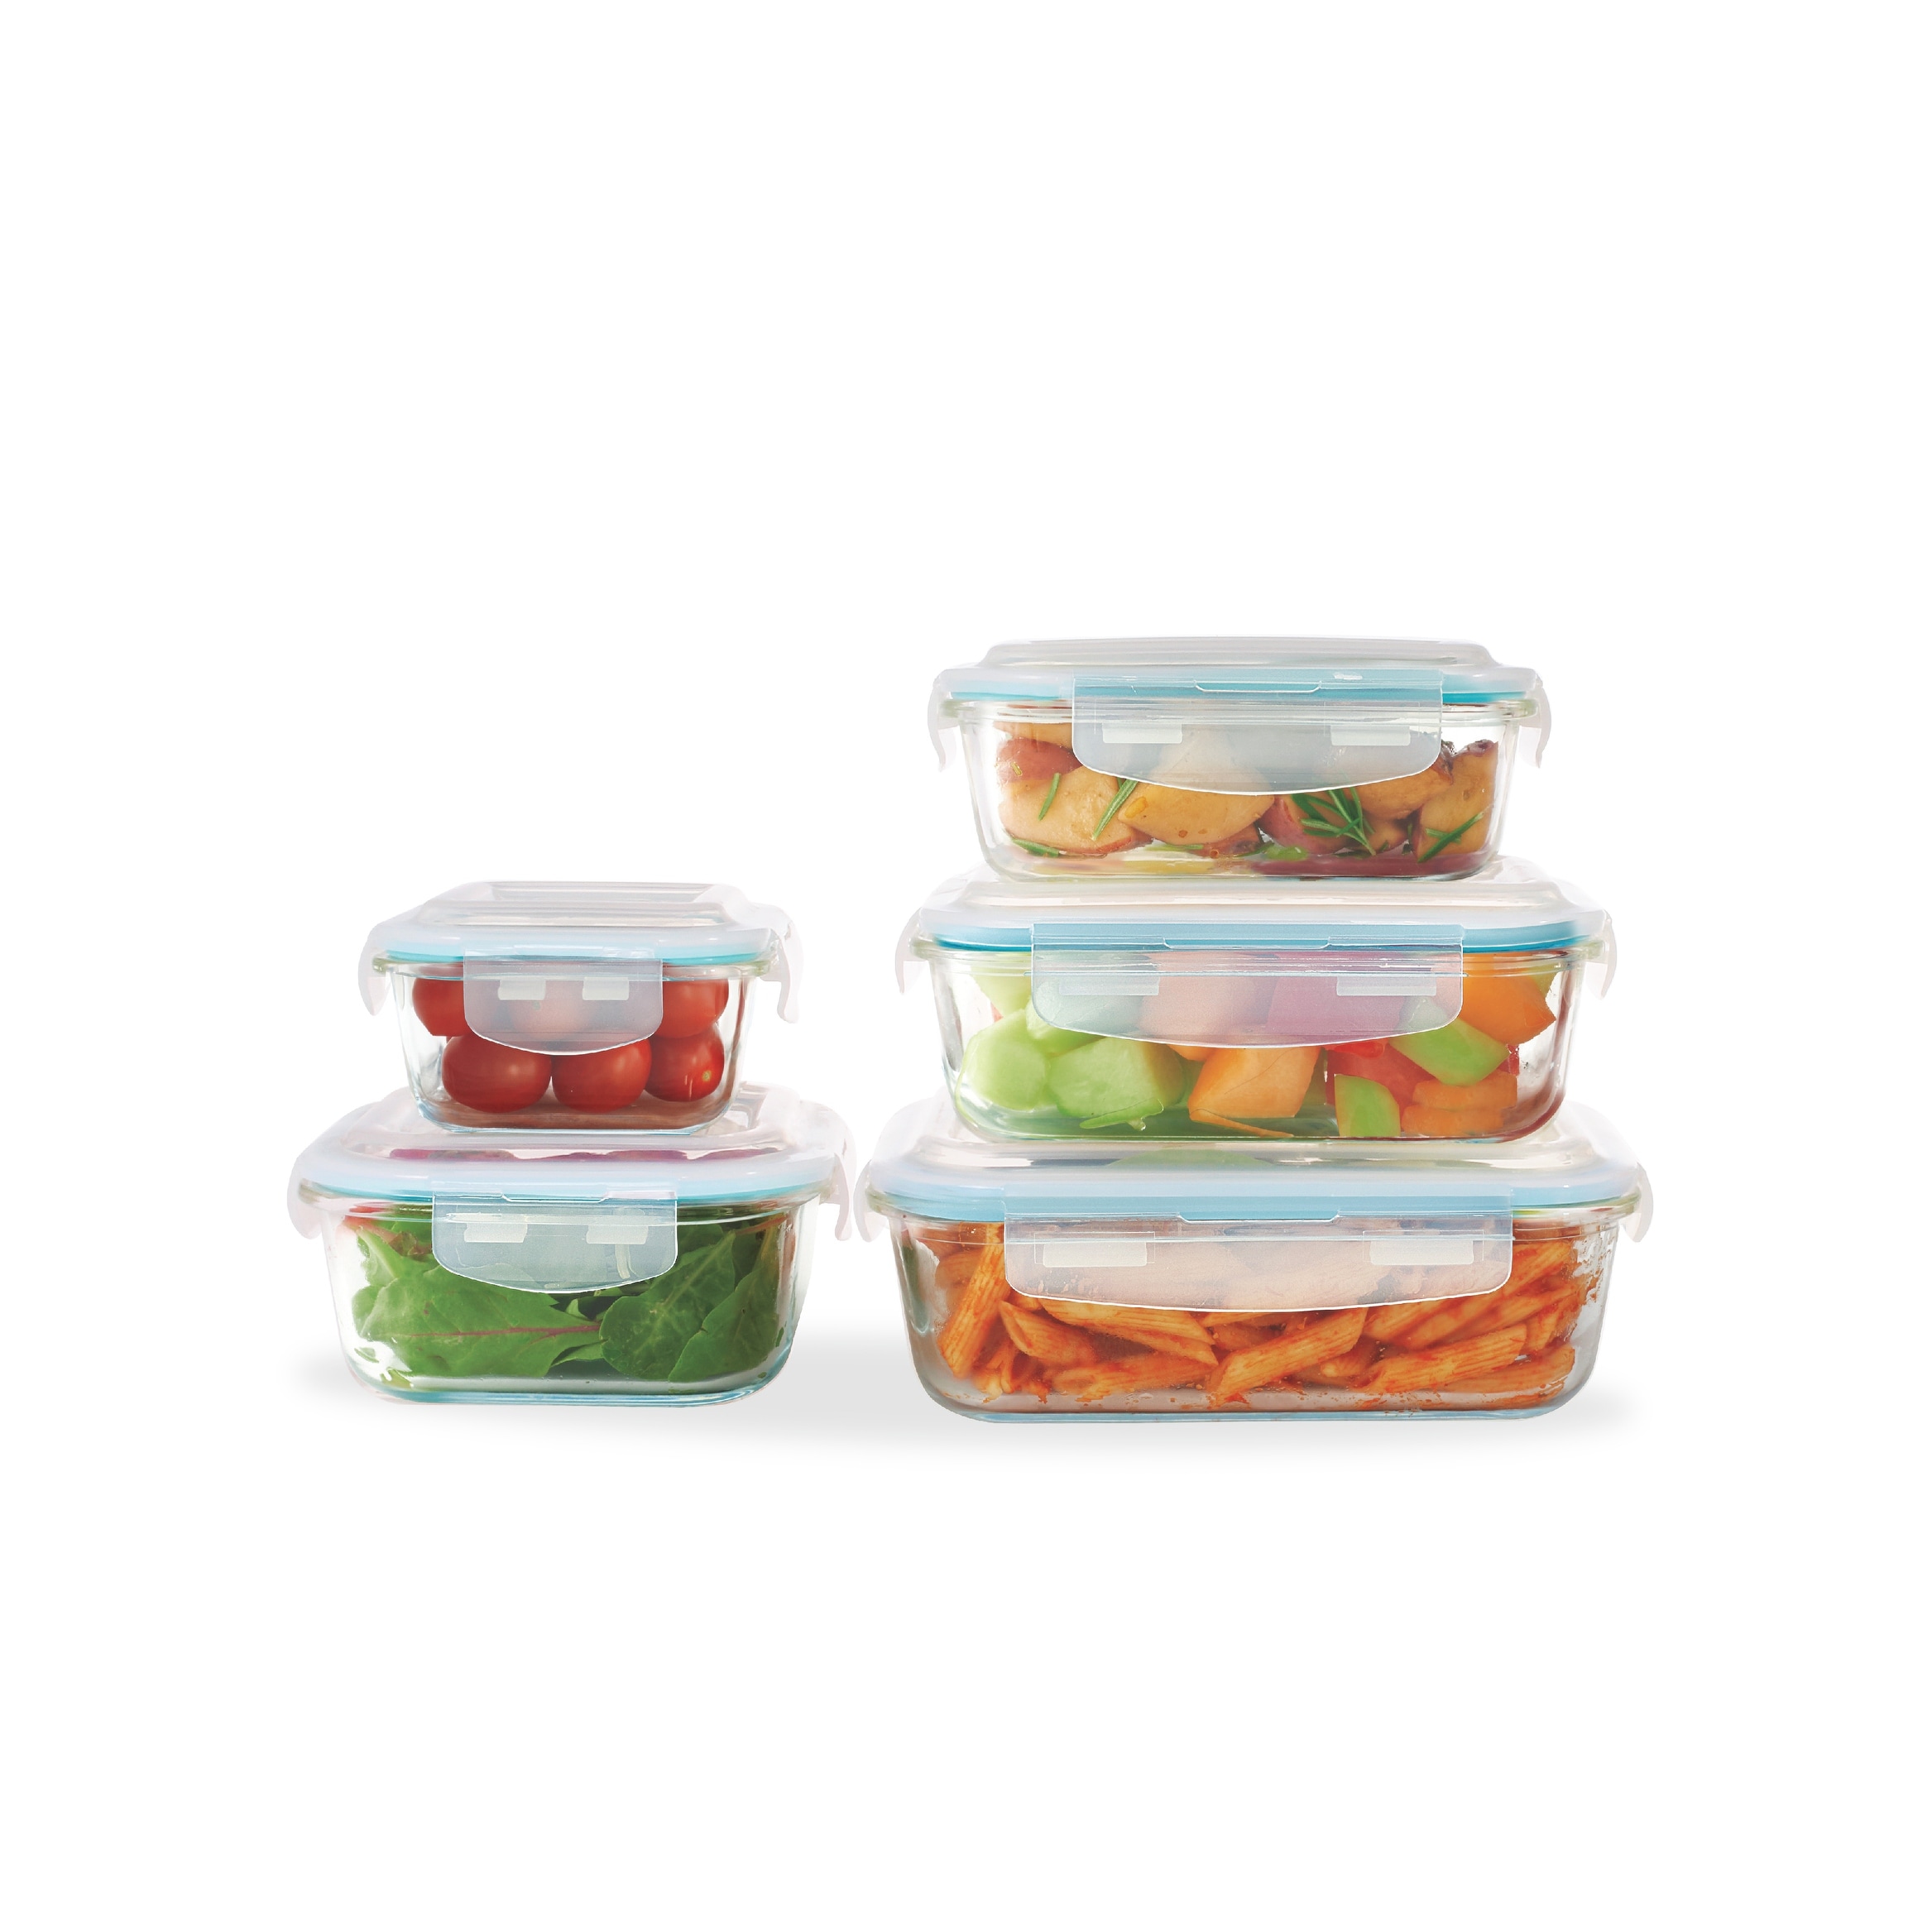 https://ak1.ostkcdn.com/images/products/is/images/direct/99bf21fae8c821473db61ba89955221f5144ee5d/Bene-Casa-10-piece-glass-food-storage-container-set%2C-air-tight-led-containers%2C-oven-safe%2C-microwave-safe.jpg